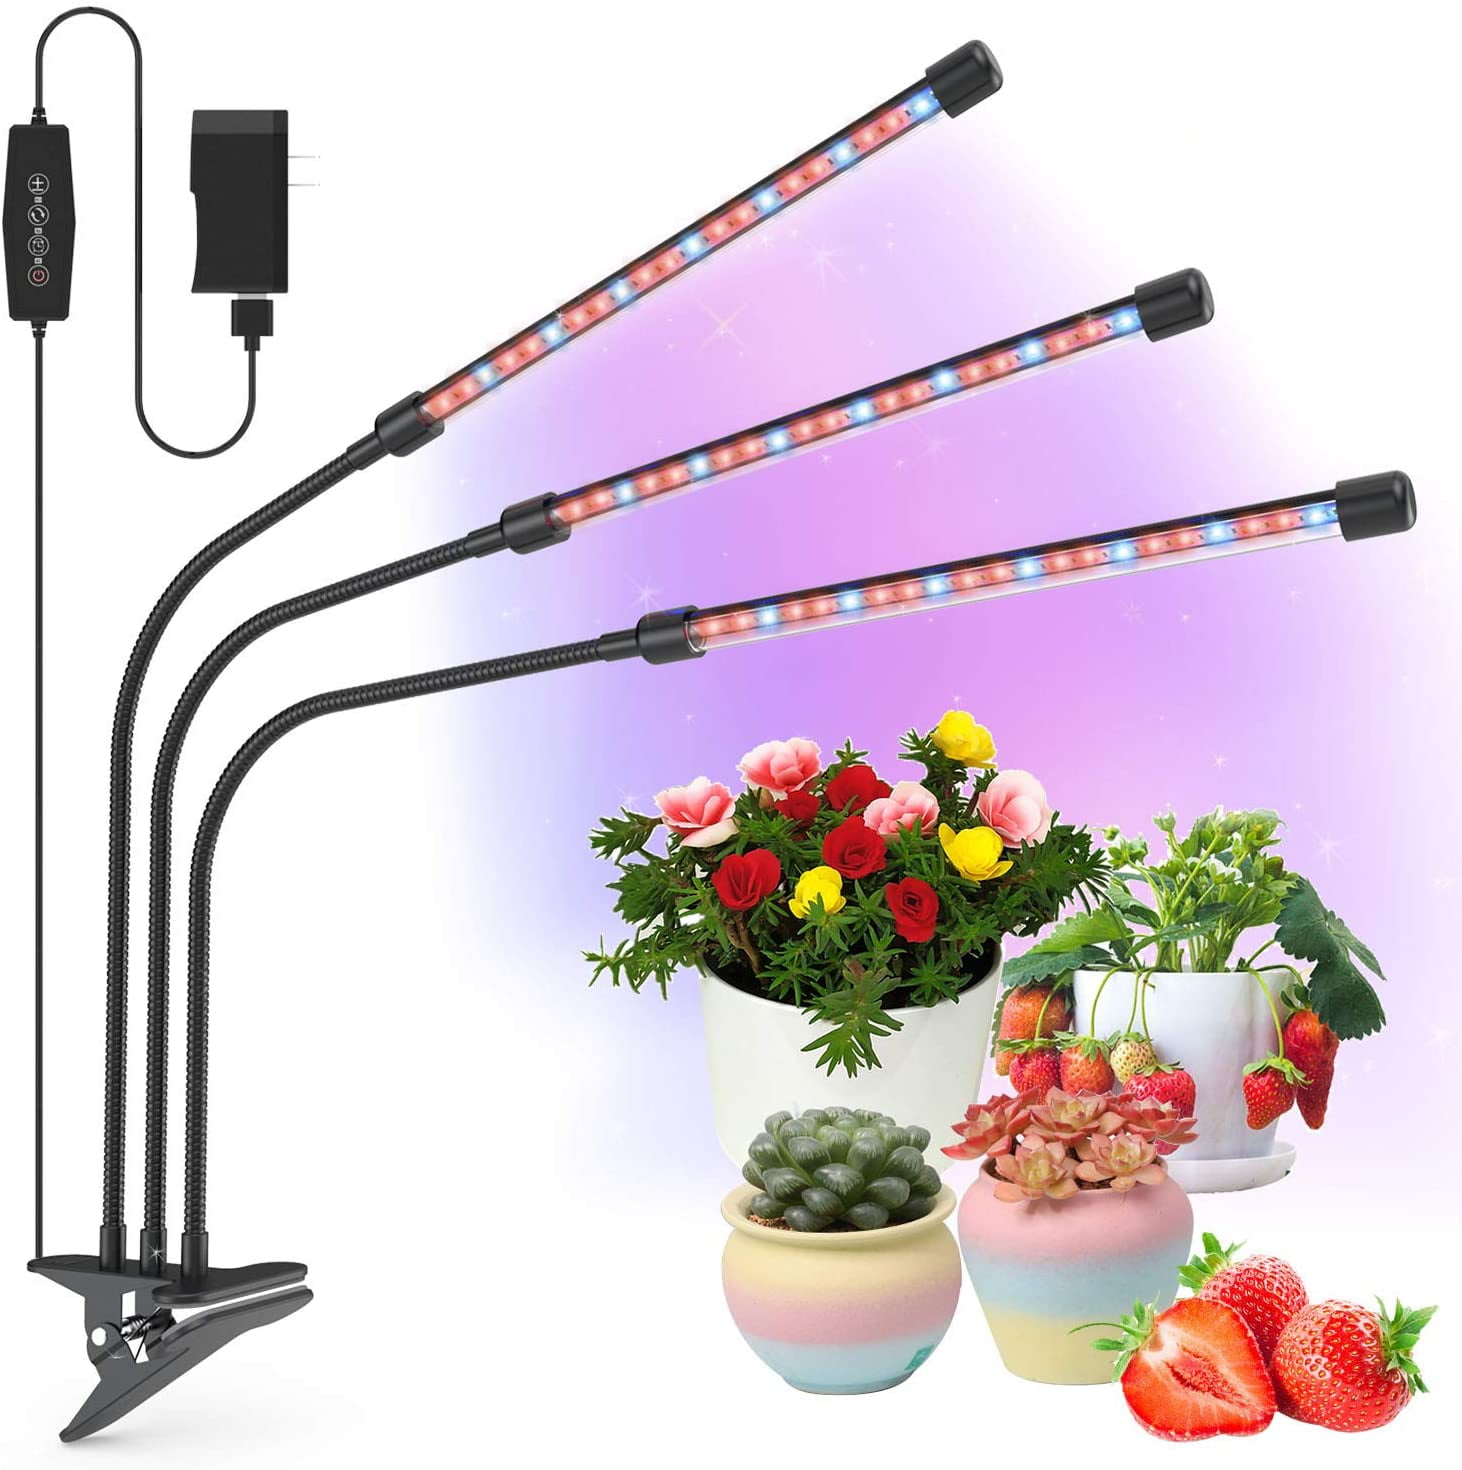 Plant Light Grow Lamp Growing Lights Full Spectrum UV Grow Lights GoGrow Grow Light LED Plant Light for Indoor Plants New Generation Desk Grow Light with Timer 